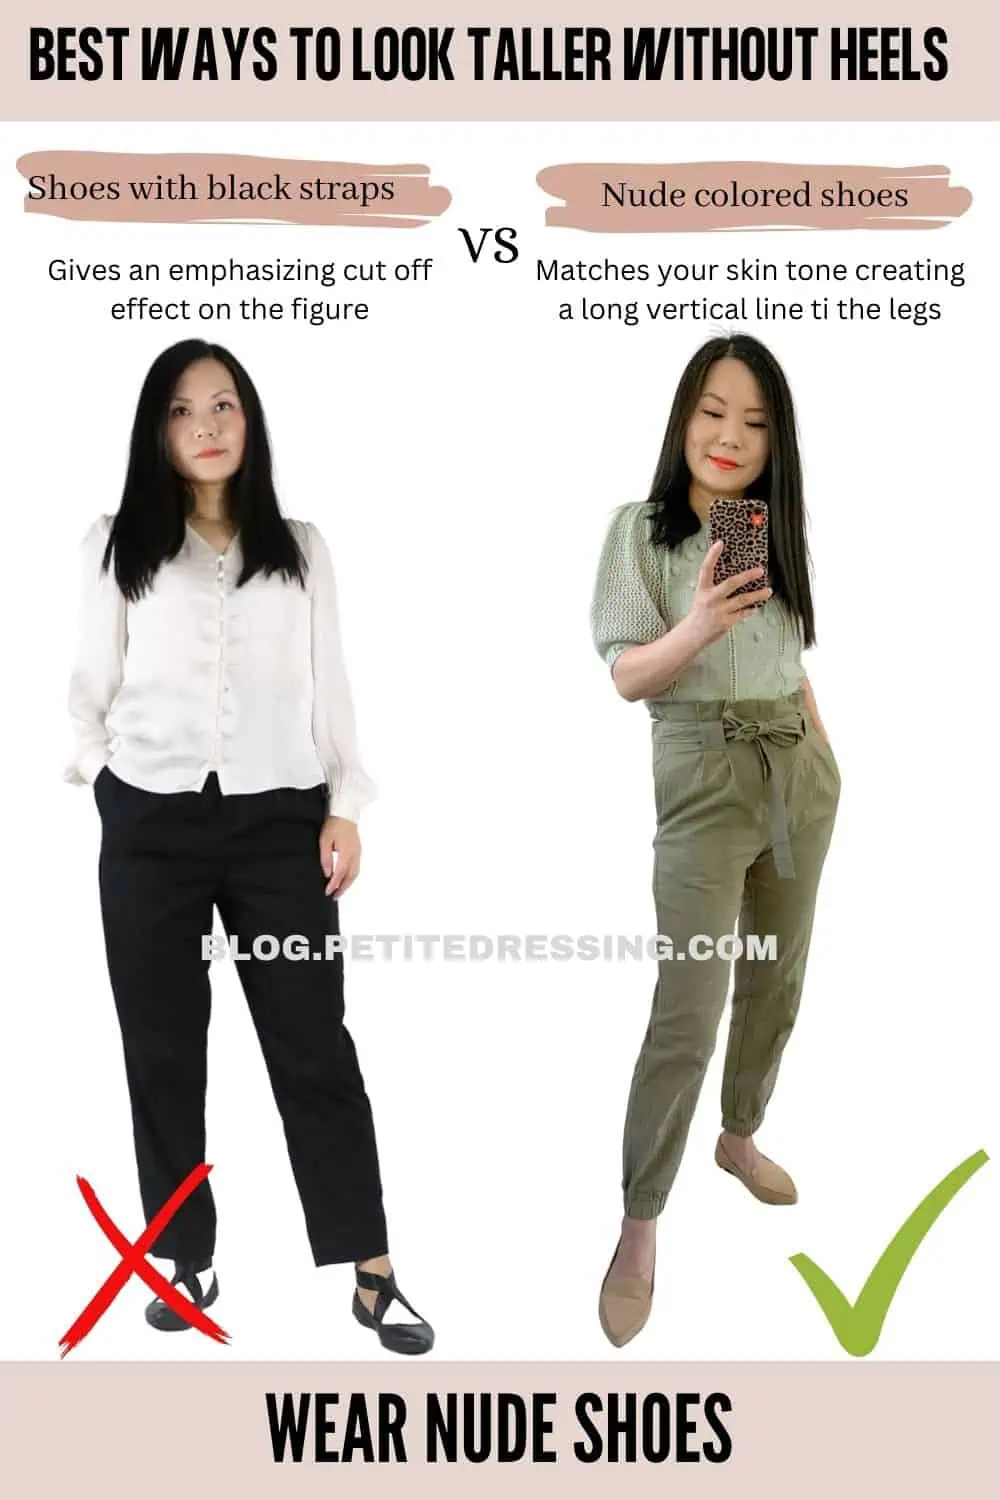 I'm 5'2″, and here's 14 Ways to Look Taller Without Heels - Petite Dressing